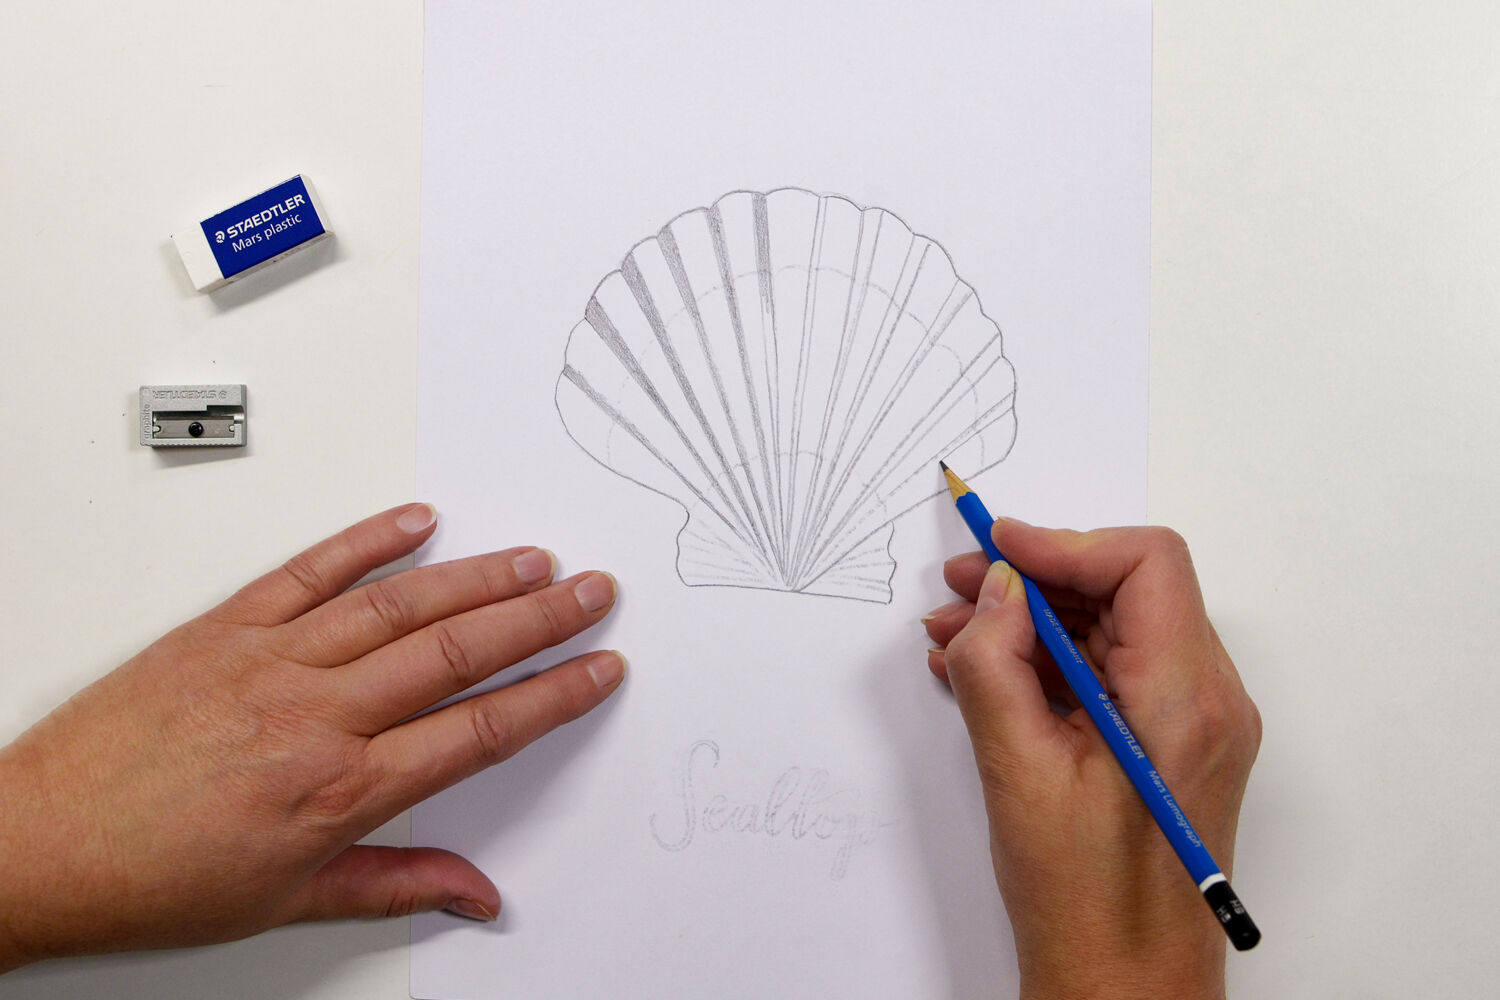 how to draw a shell